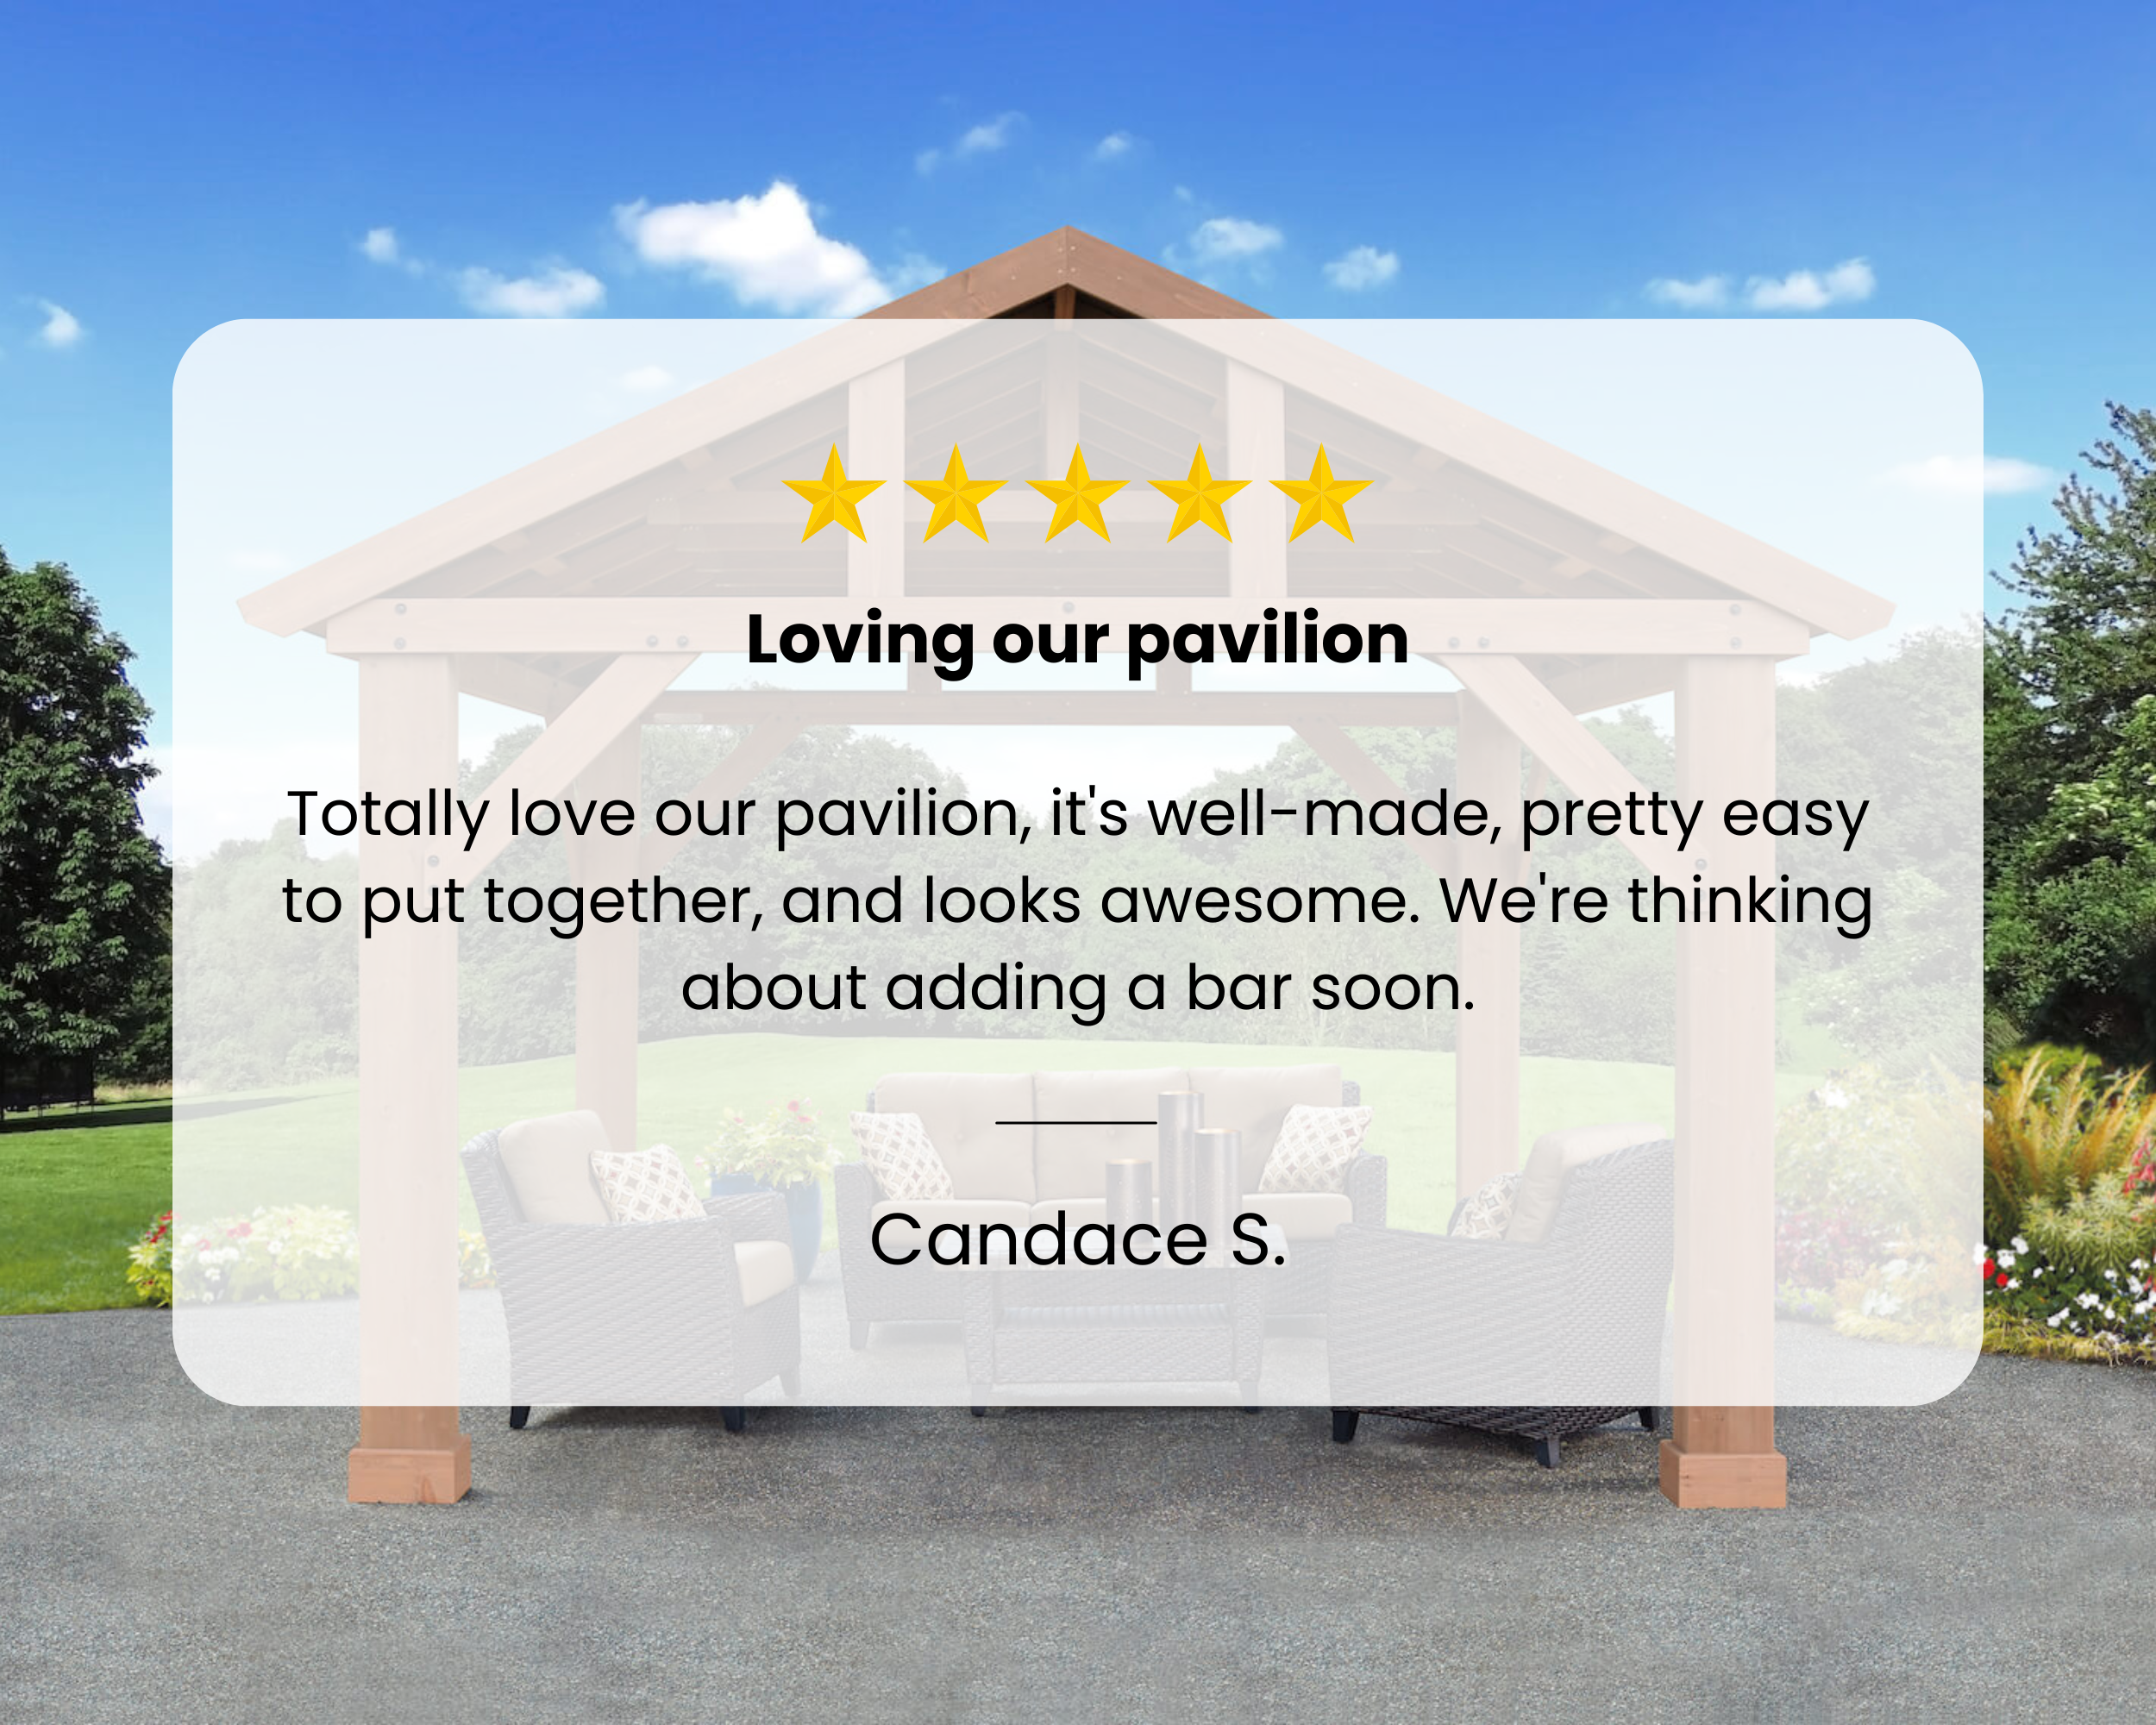 Customer review of the Meridian Cedar 14 x 12 Pavilion with Aluminum Roof.